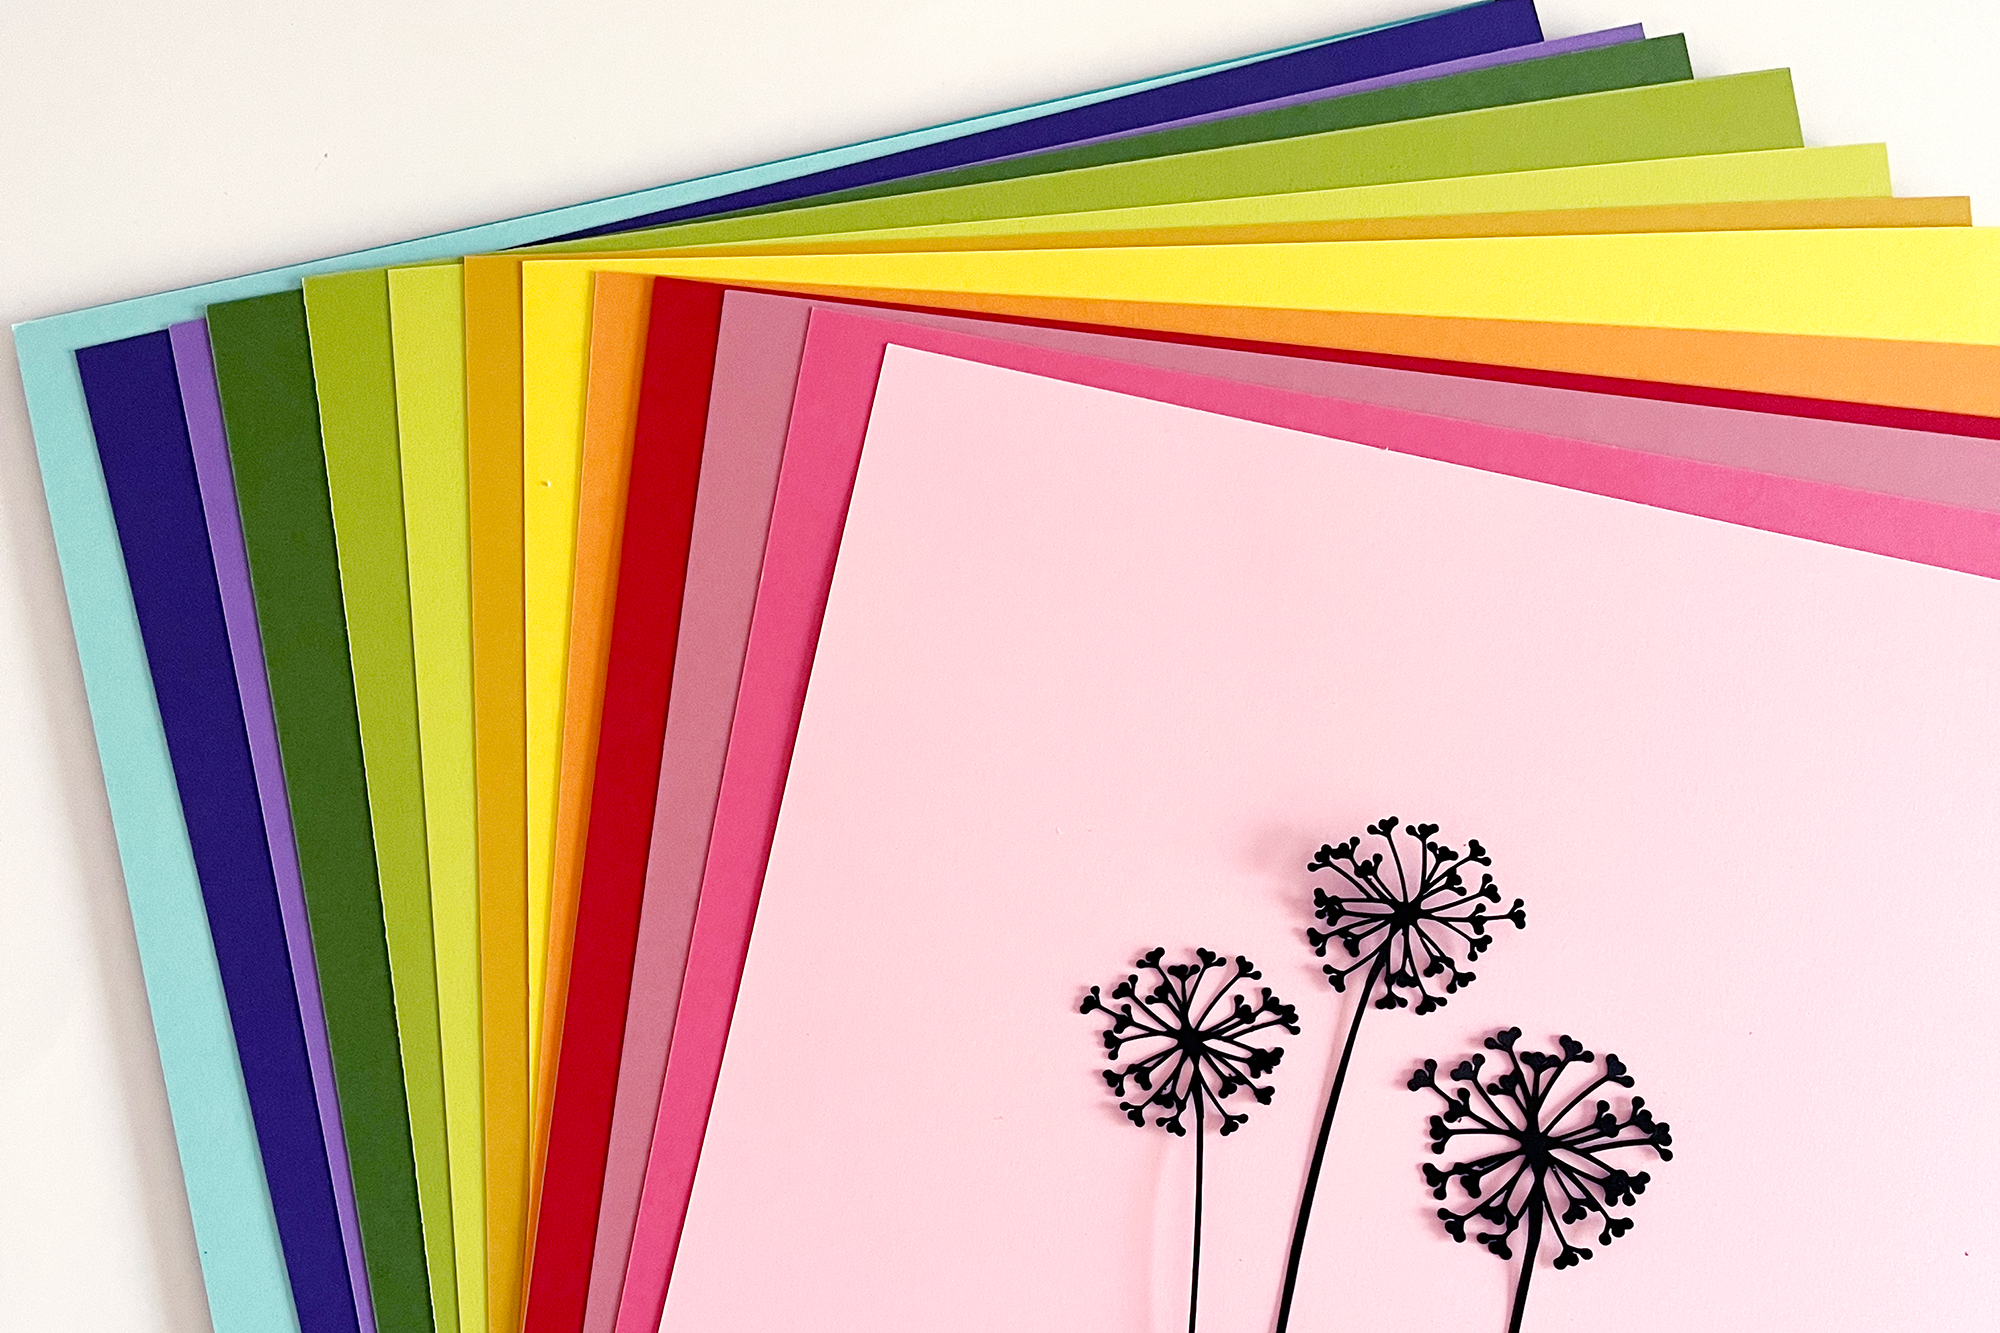 Strong Bulk Cardstock Paper at Low Prices 